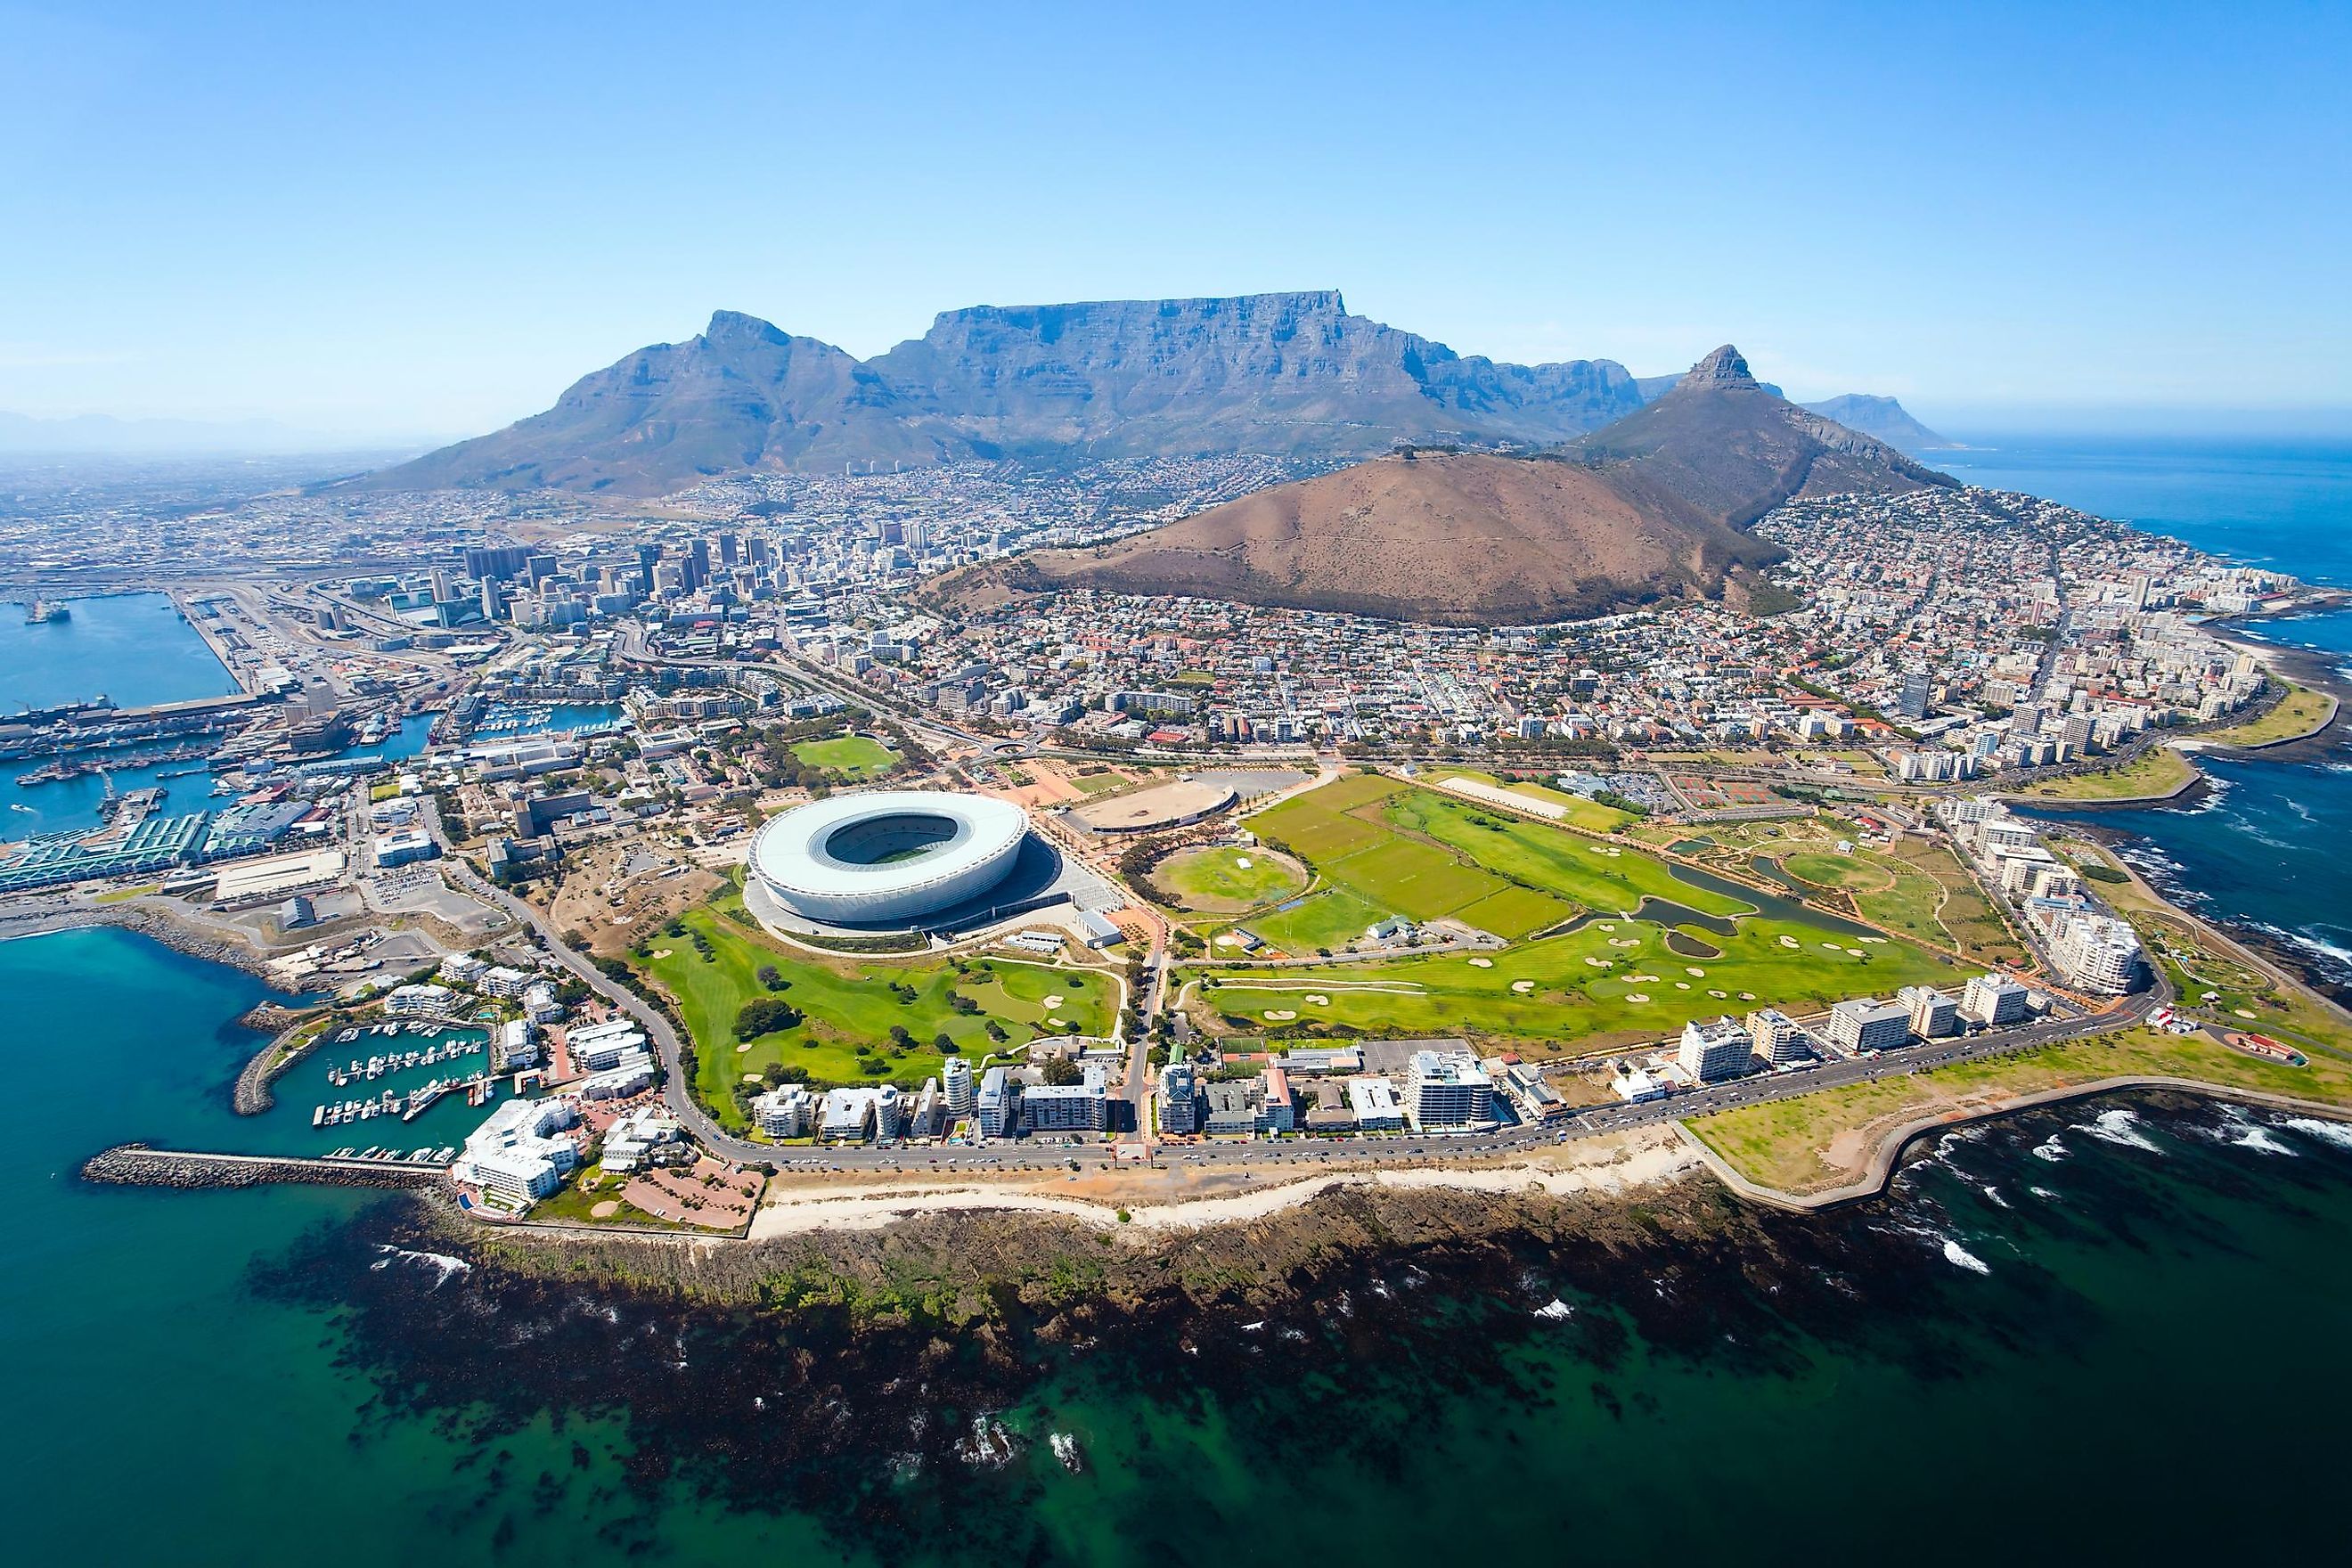 Cape Town, one of the capitals of South Africa